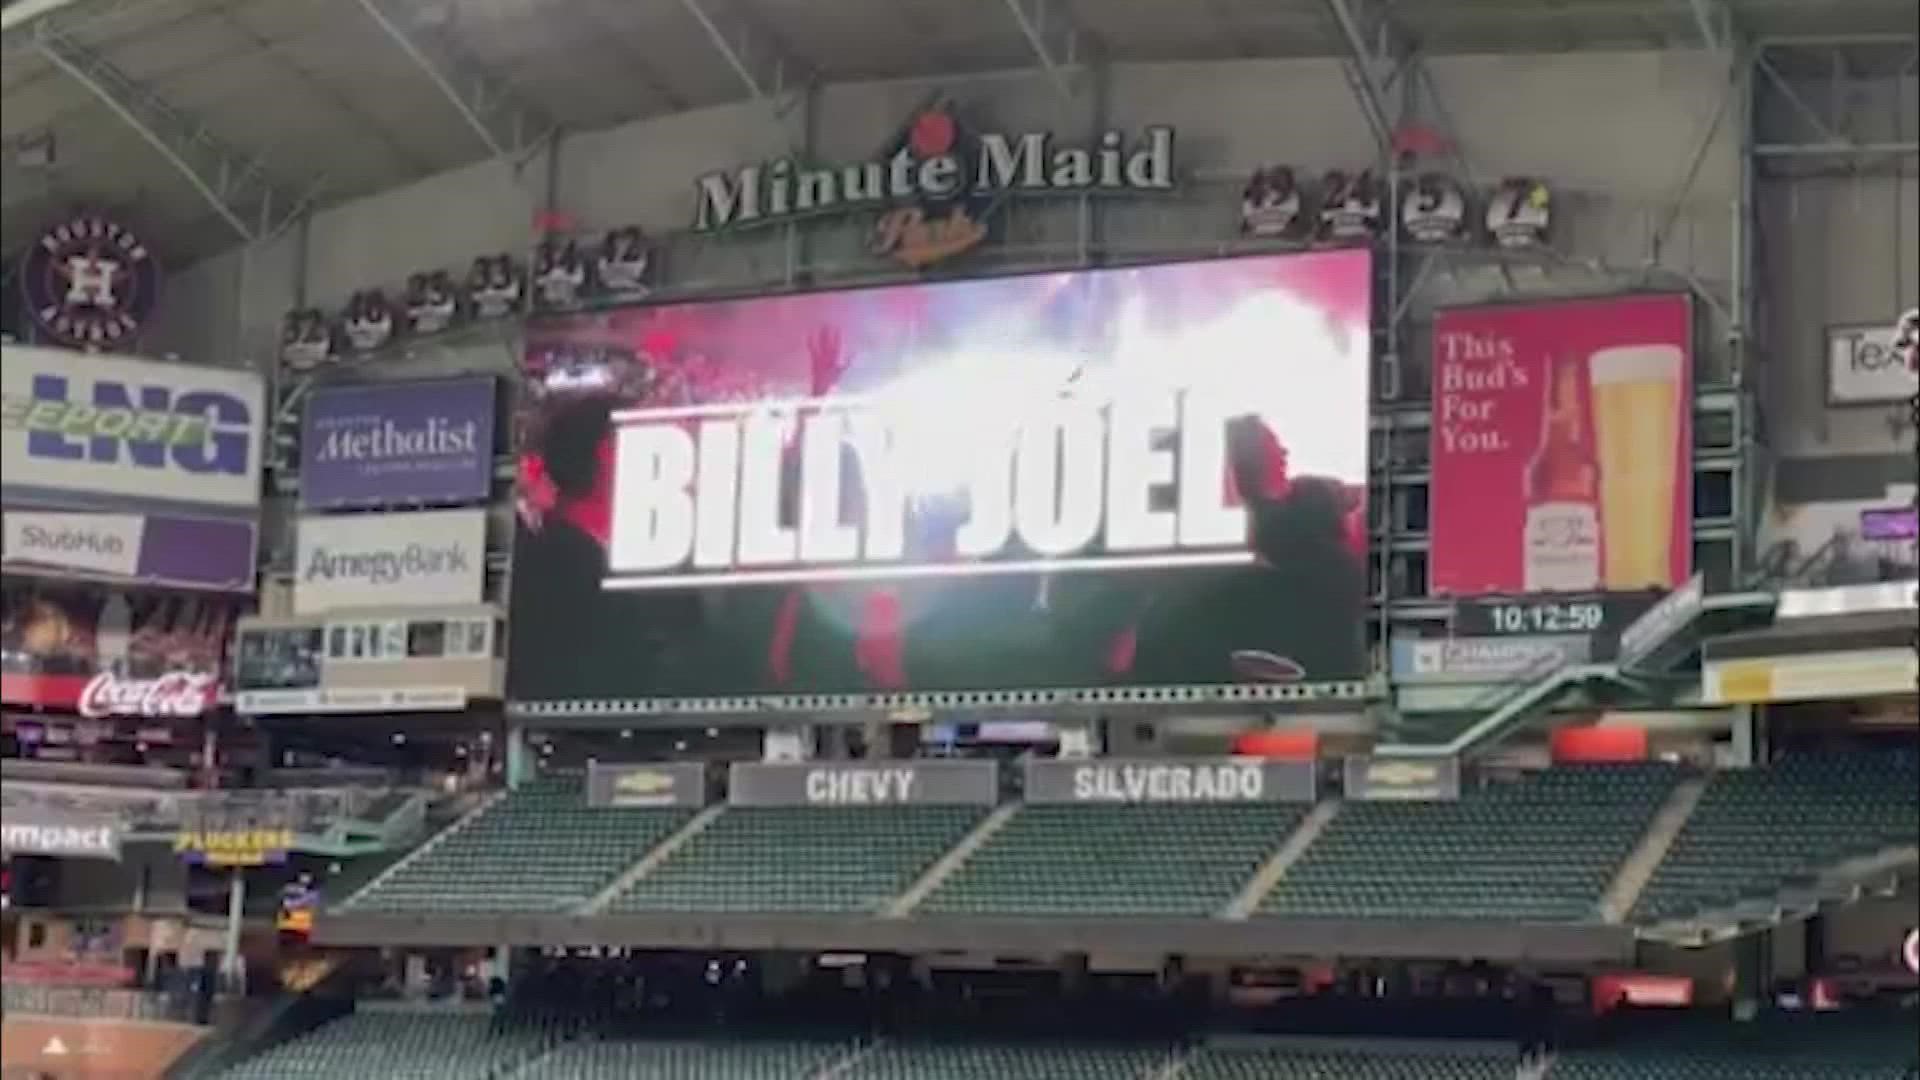 Billy Joel will be live in concert at Minute Maid Park on September 23, 2022. Tickets go sale next Friday.